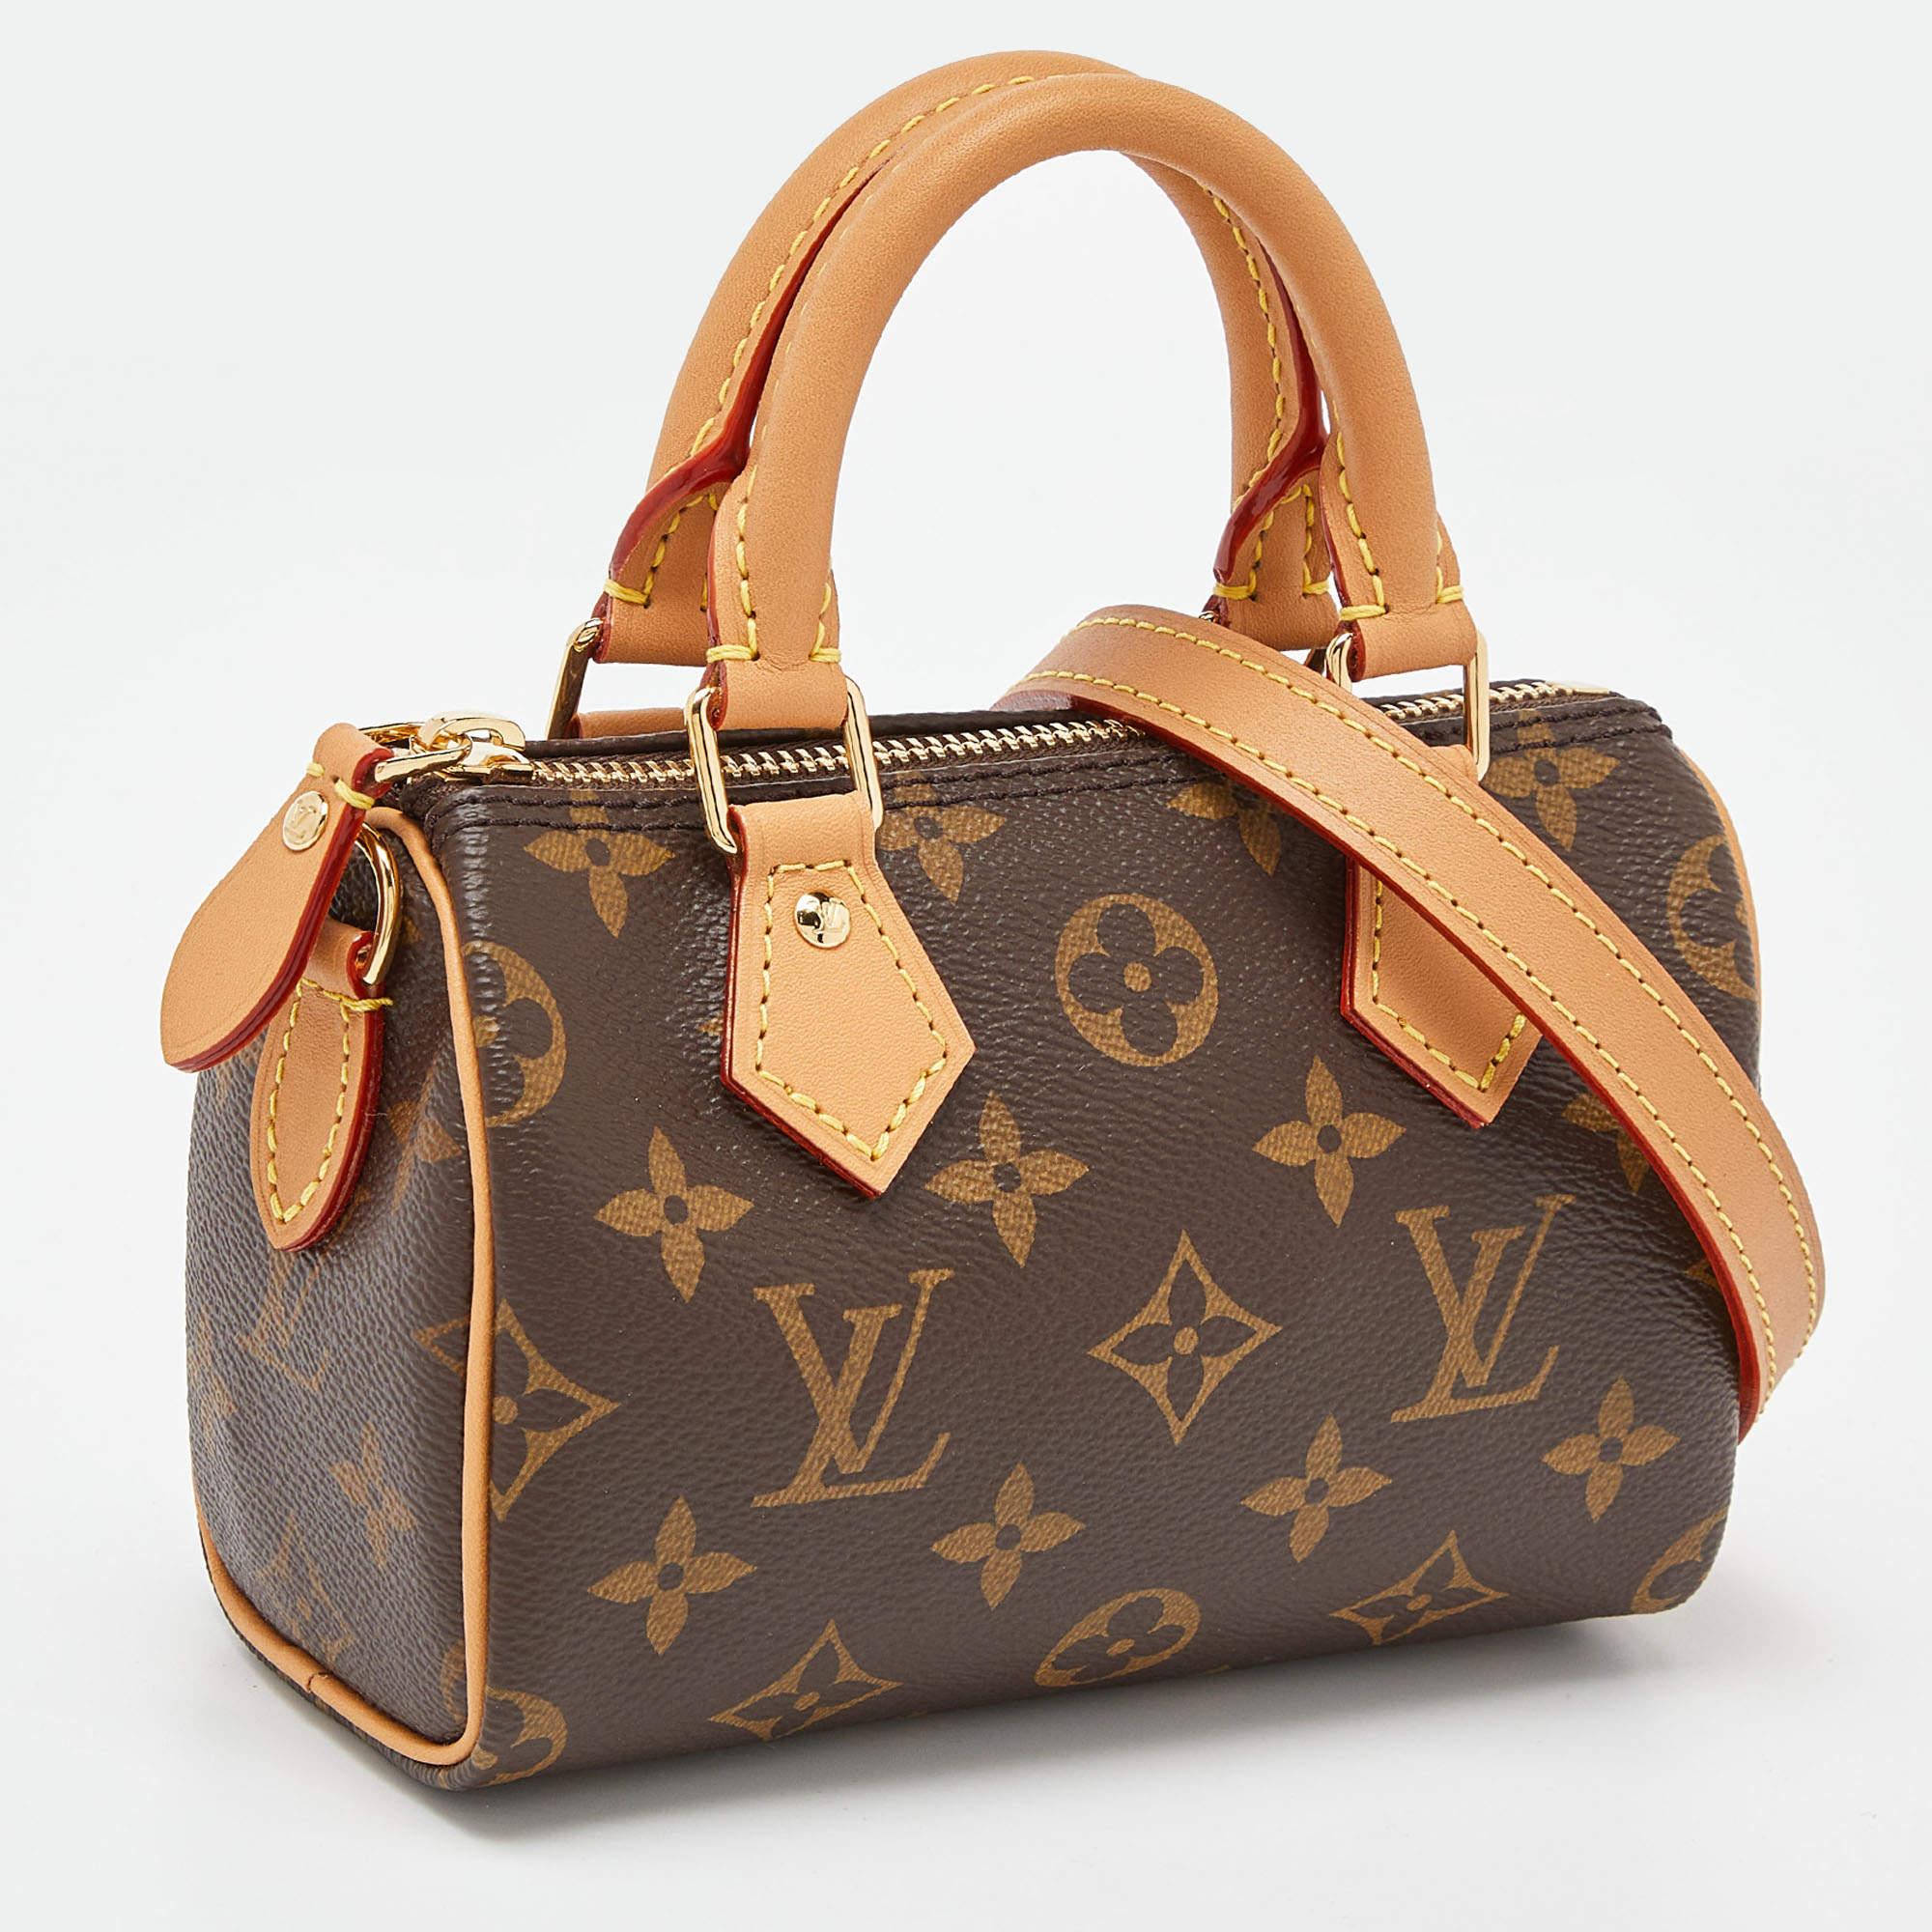 Highlight your look with this LV Nano Speedy bag. It is constructed using monogram canvas and leather into a sized-down version to be light and handy. The bag is added with gold-tone hardware and lined with canvas.

